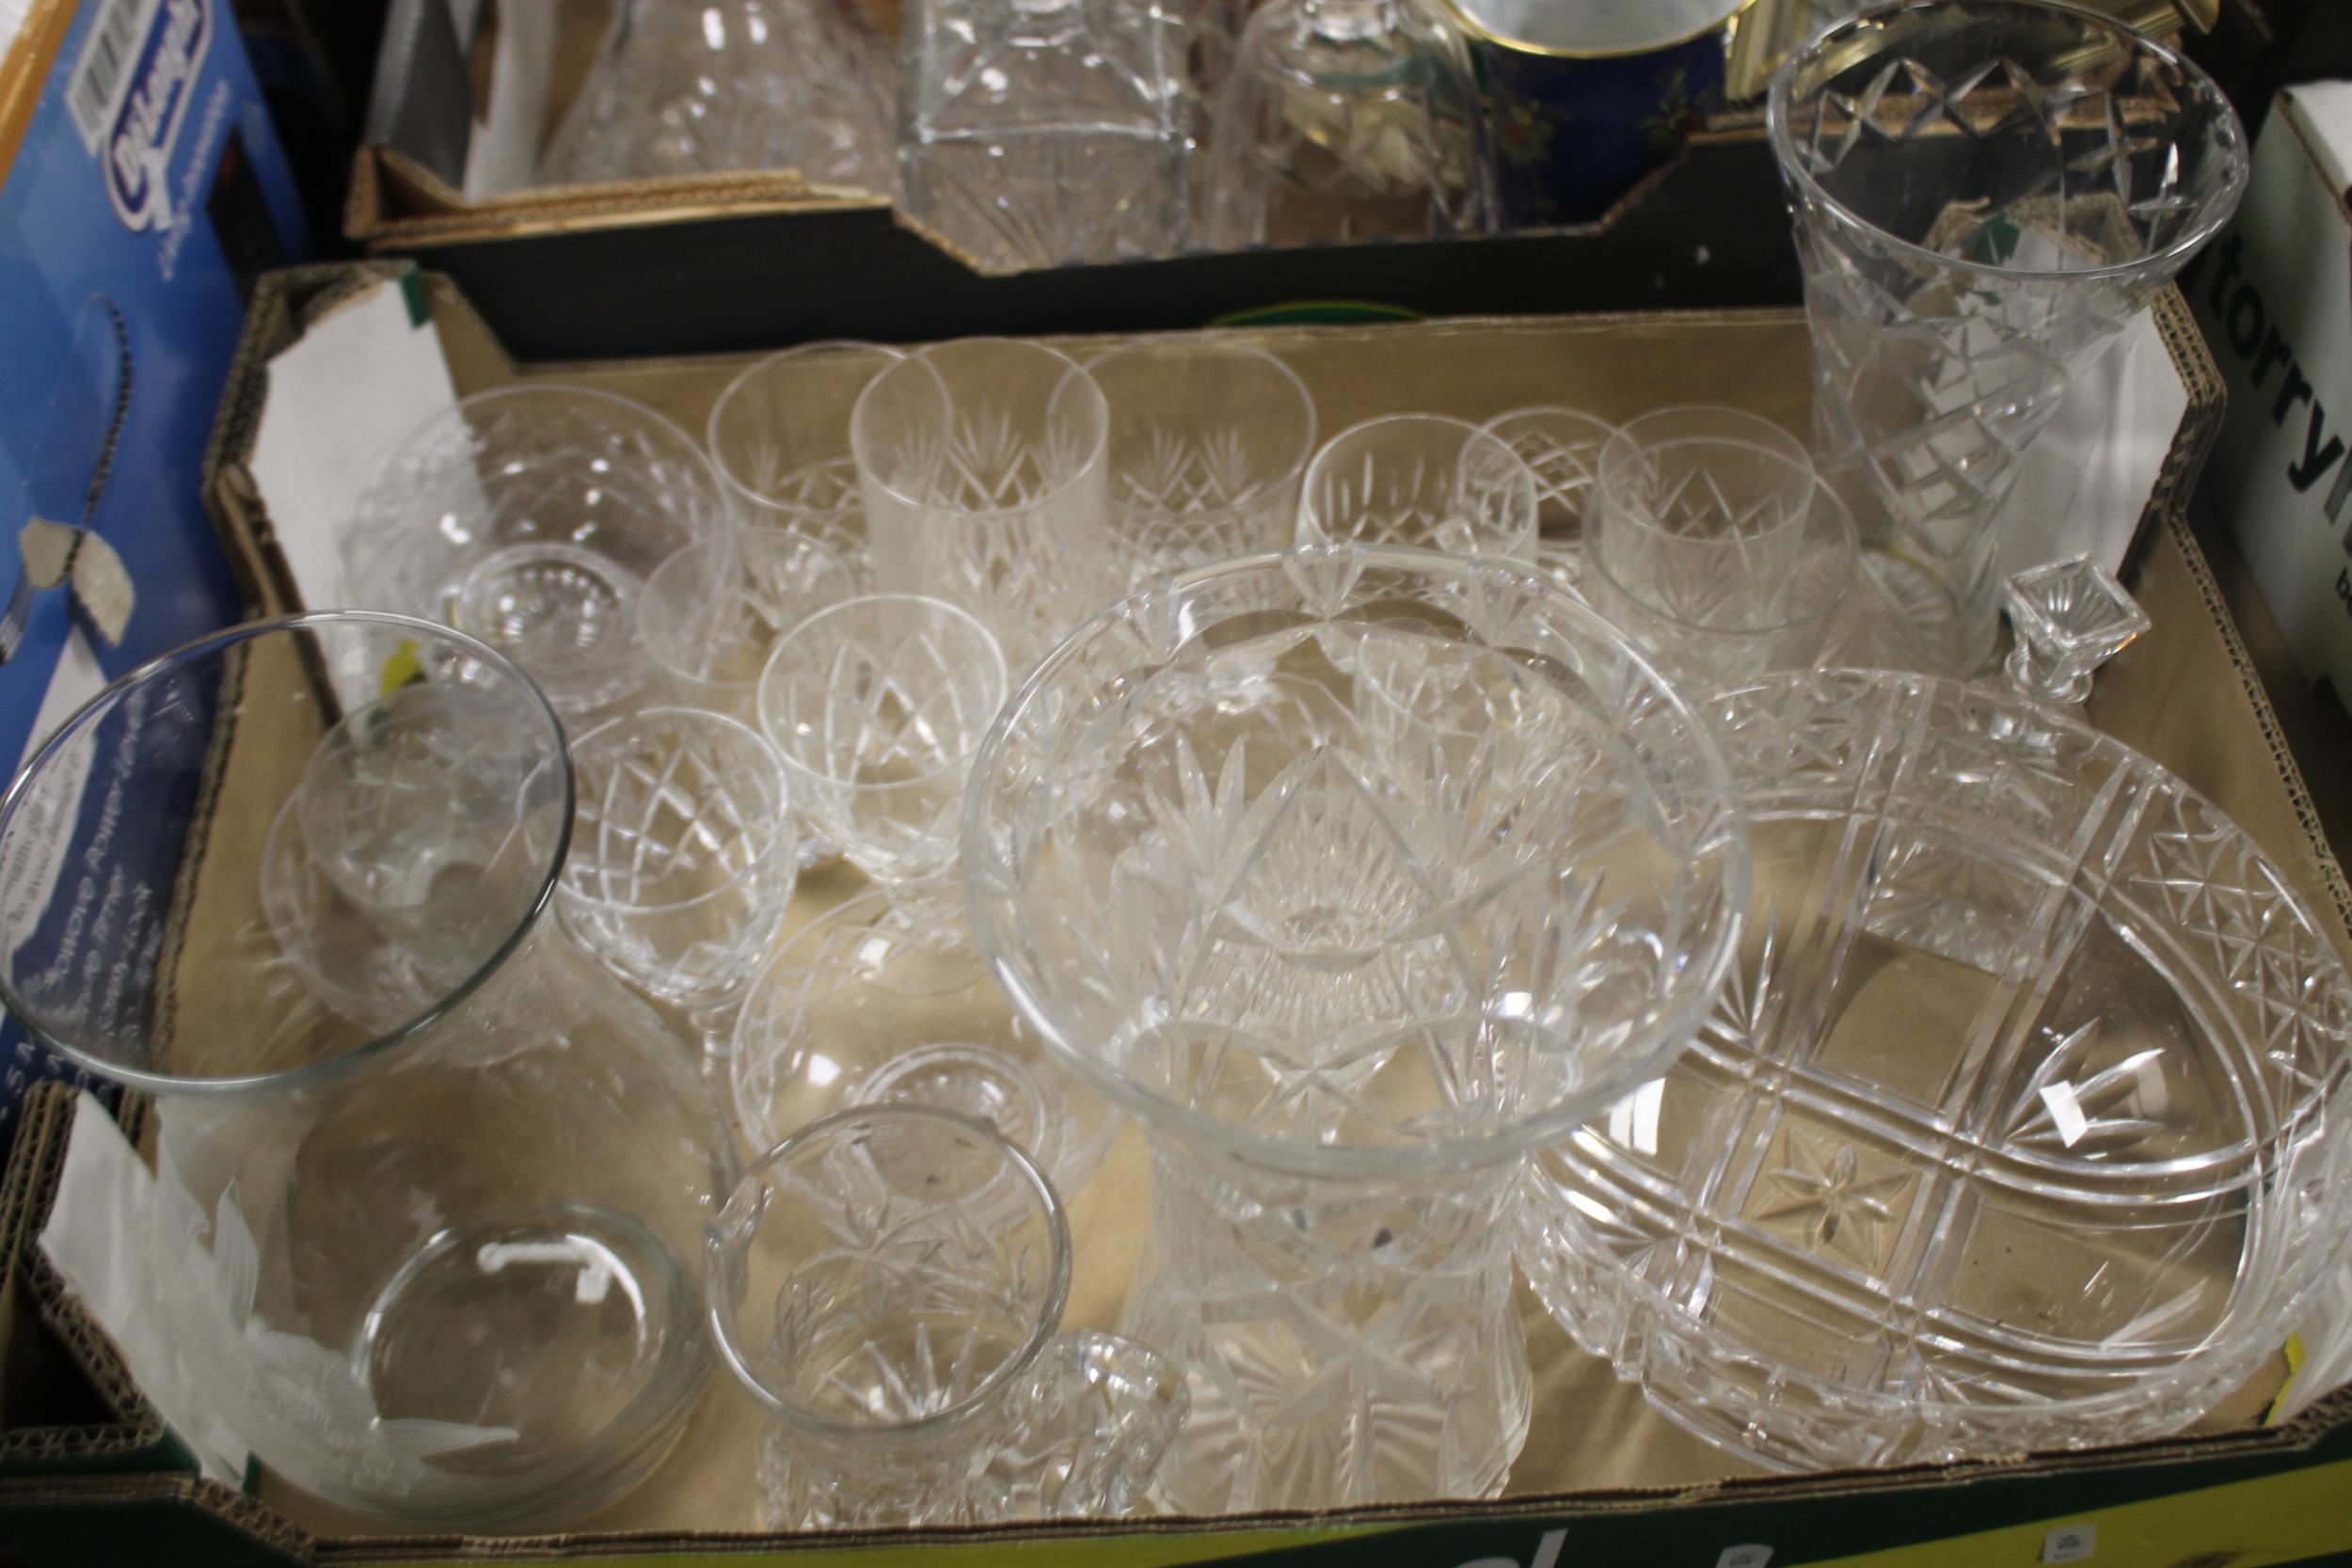 TWO TRAYS OF GLASSWARE AND CERAMICS (TRAYS NOT INCLUDED) - Image 3 of 3